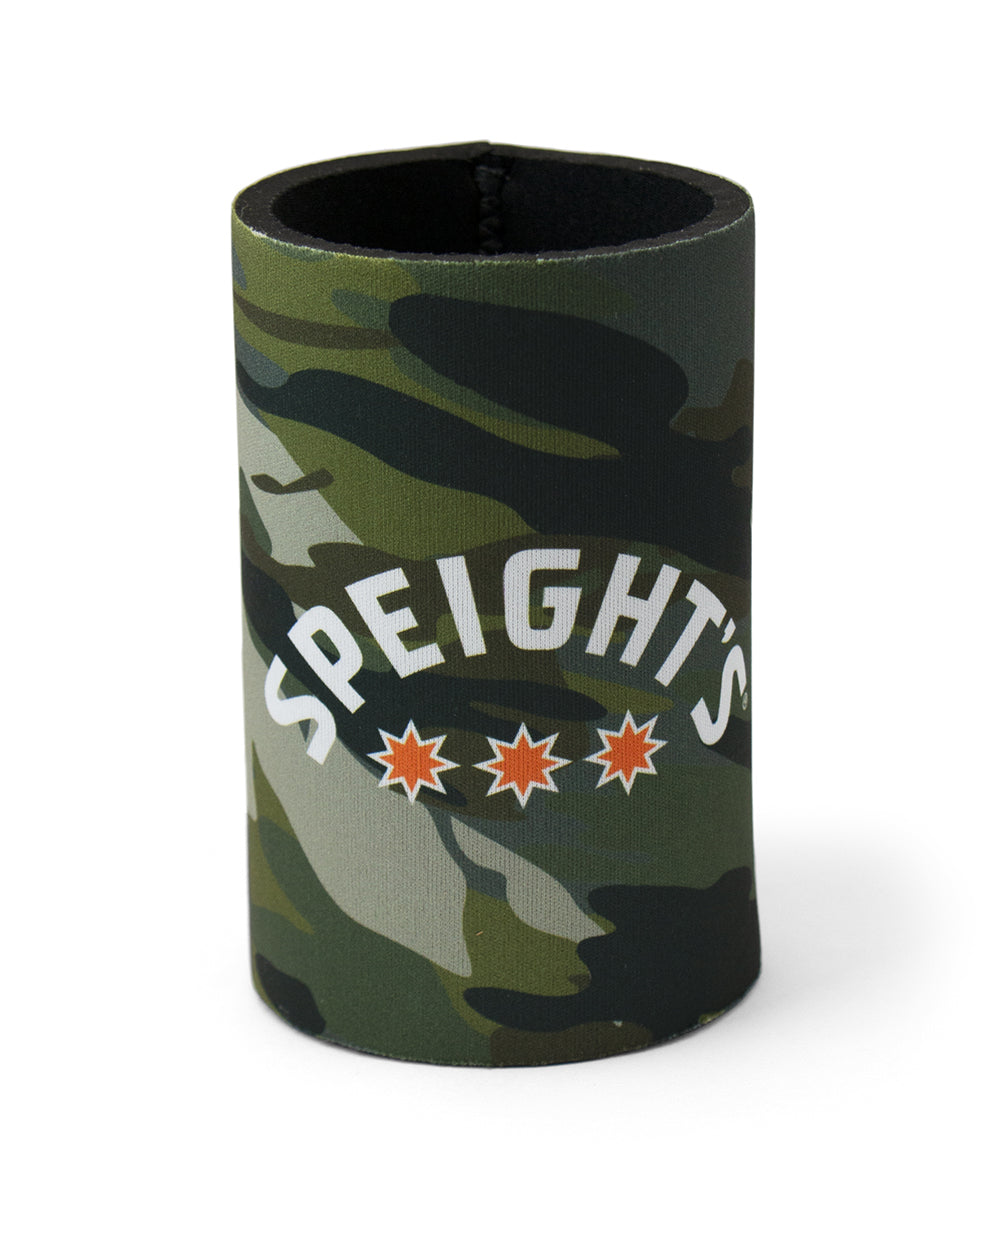 Speight's Camo Stubby Cooler -  Beer Gear Apparel & Merchandise - Speights - Lion Red - VB - Tokyo Dy merch